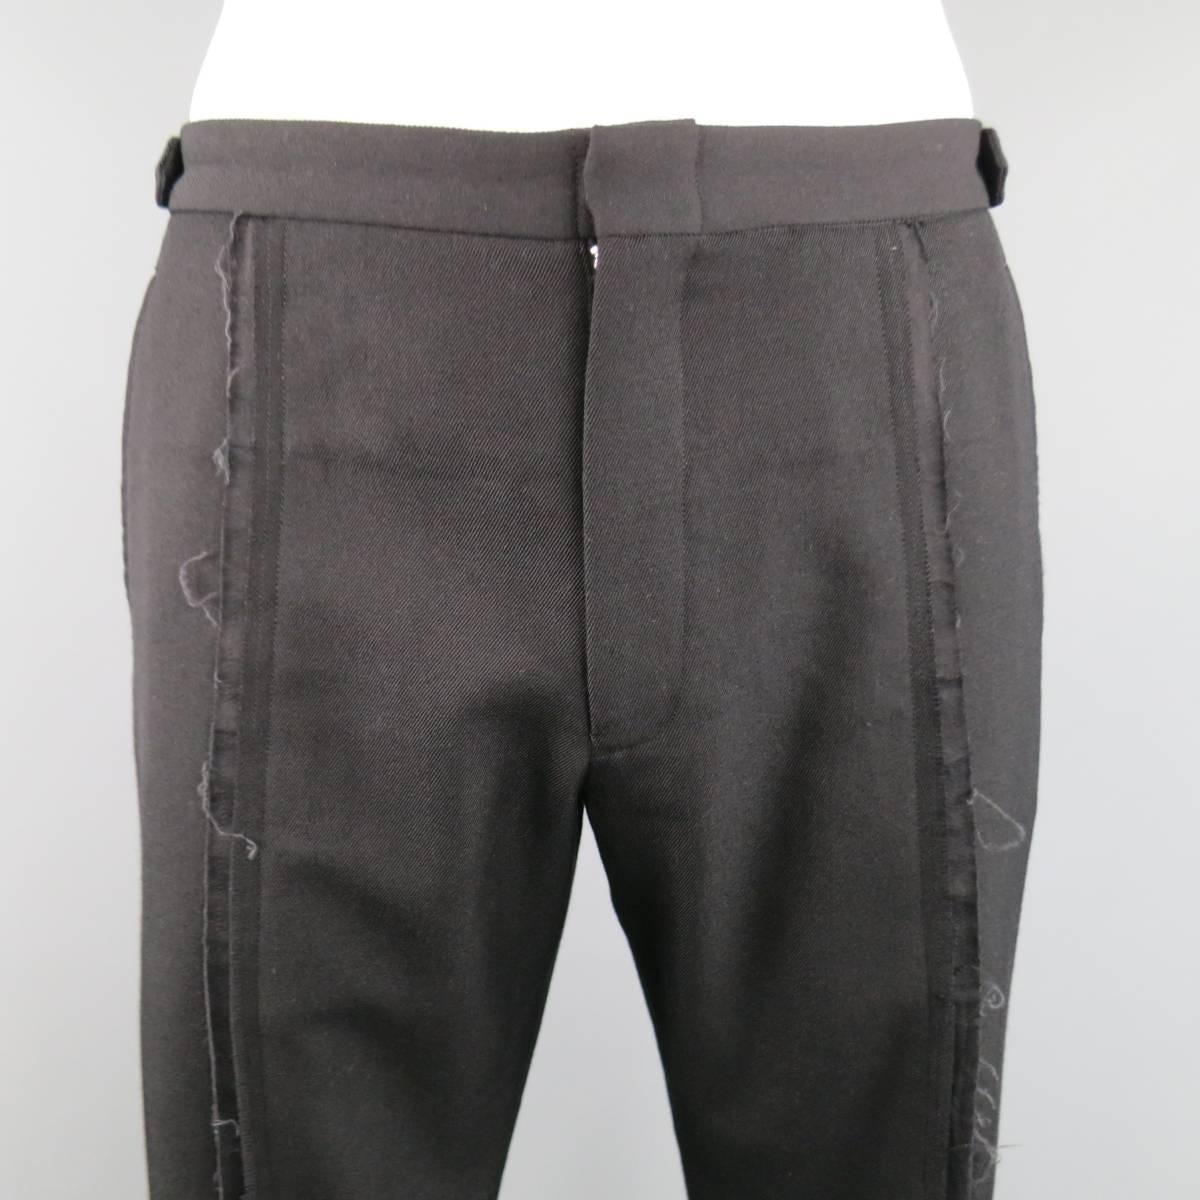 COMMES des GARCONS HOMME PLUS pants come in a medium weight black wool twill and feature a raw, frayed front eg seam. Have been let out and side tabs are not stitched down. As-Is. Made in Italy.
 
Good Pre-Owned Condition.
Marked: L AD2002
